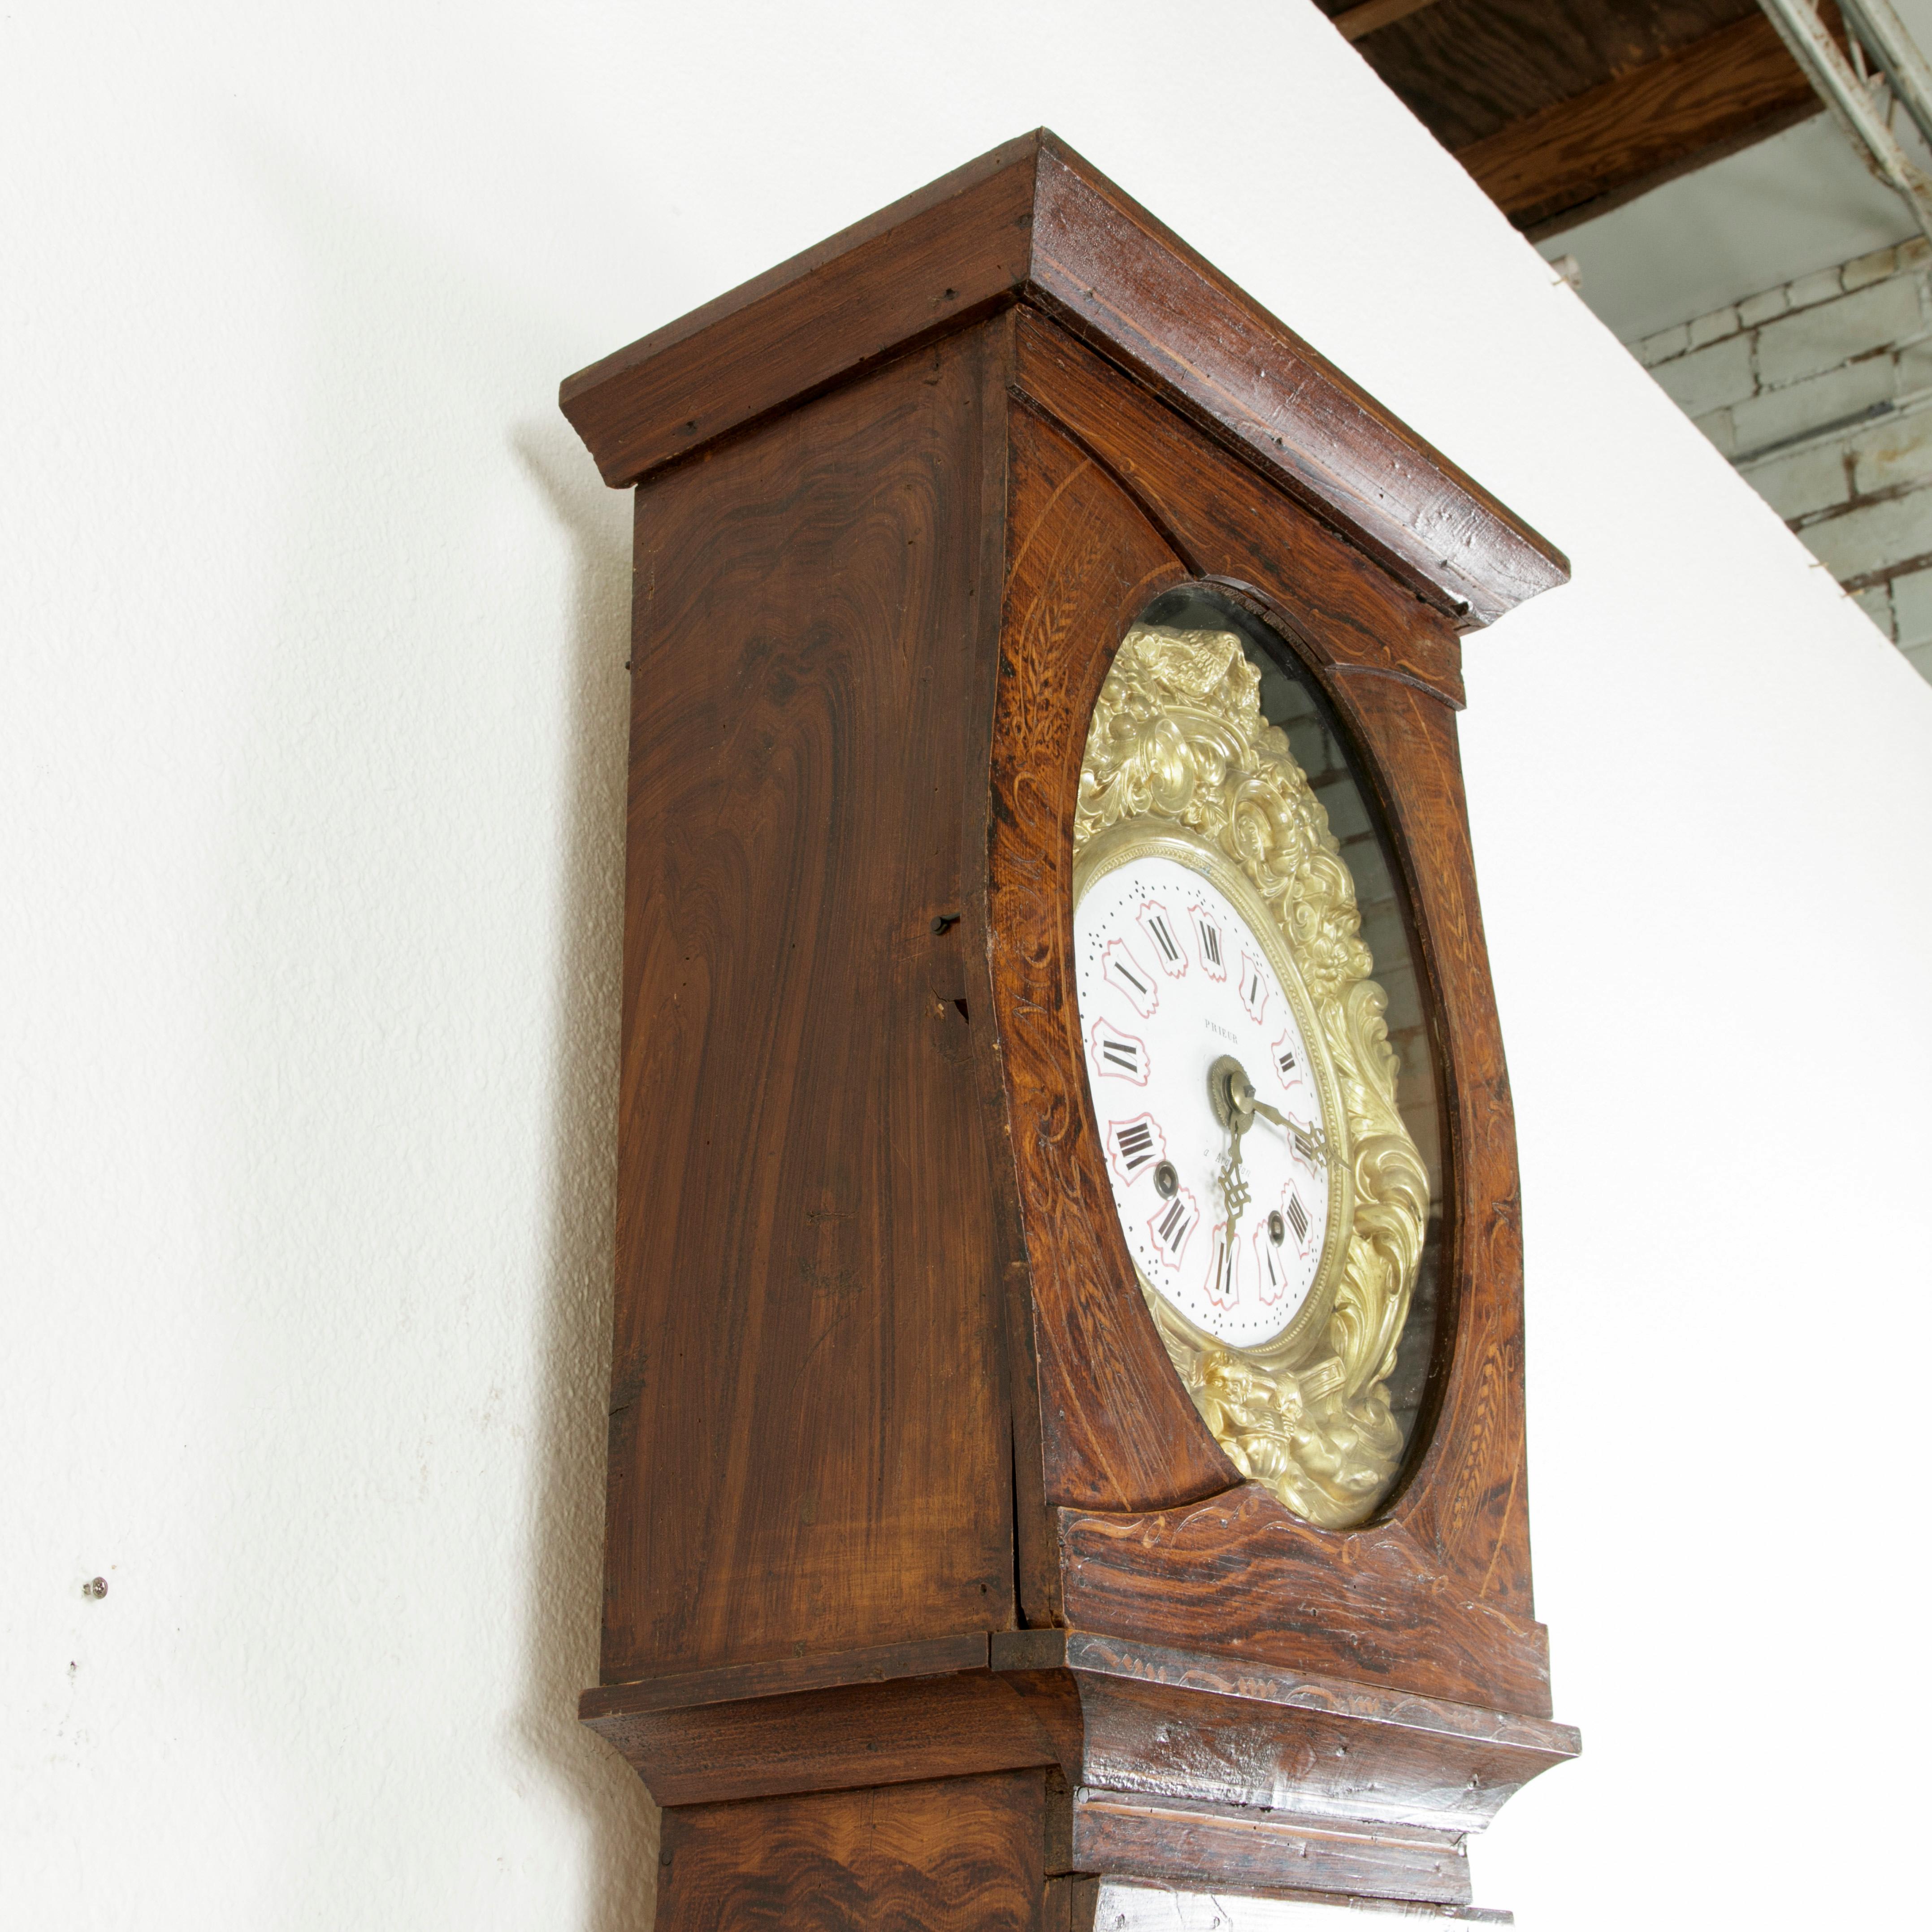 Repoussé 19th Century French Hand Painted Faux Bois Grandfather Clock with Brass Repousse